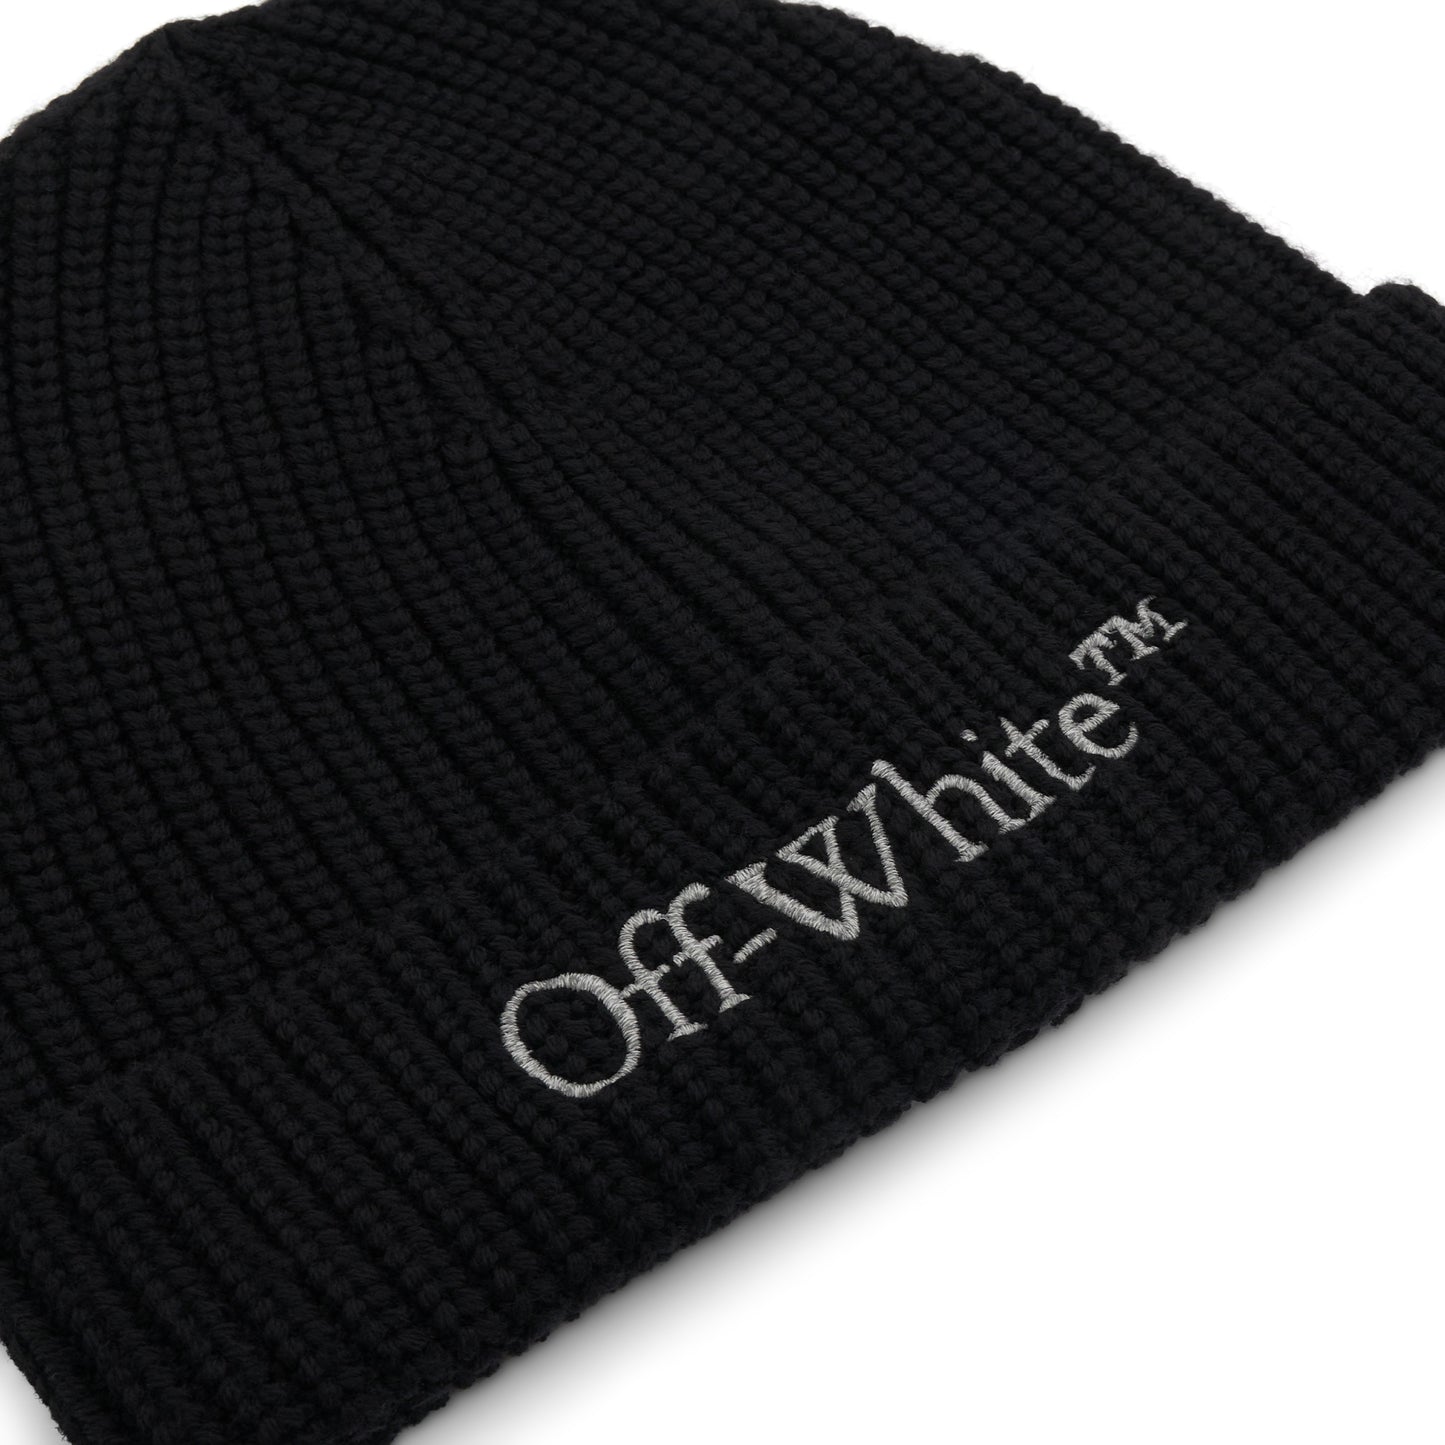 Bookish Classic Knit Beanie in Black